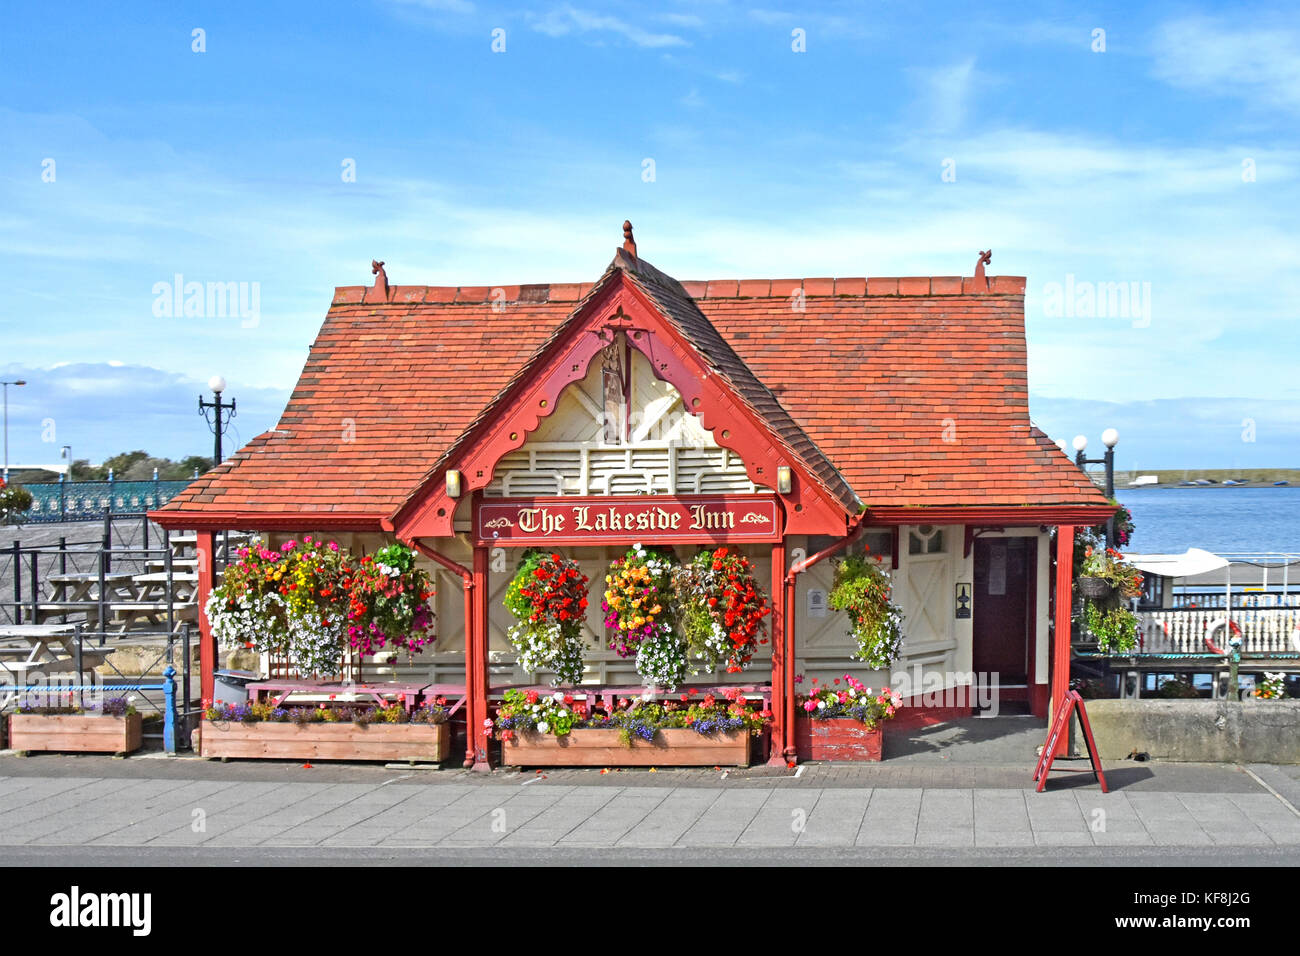 Summer flowers in planters & hanging baskets front of The Lakeside Inn on promenade beside Marine Lake in Southport one time smallest pub England UK Stock Photo